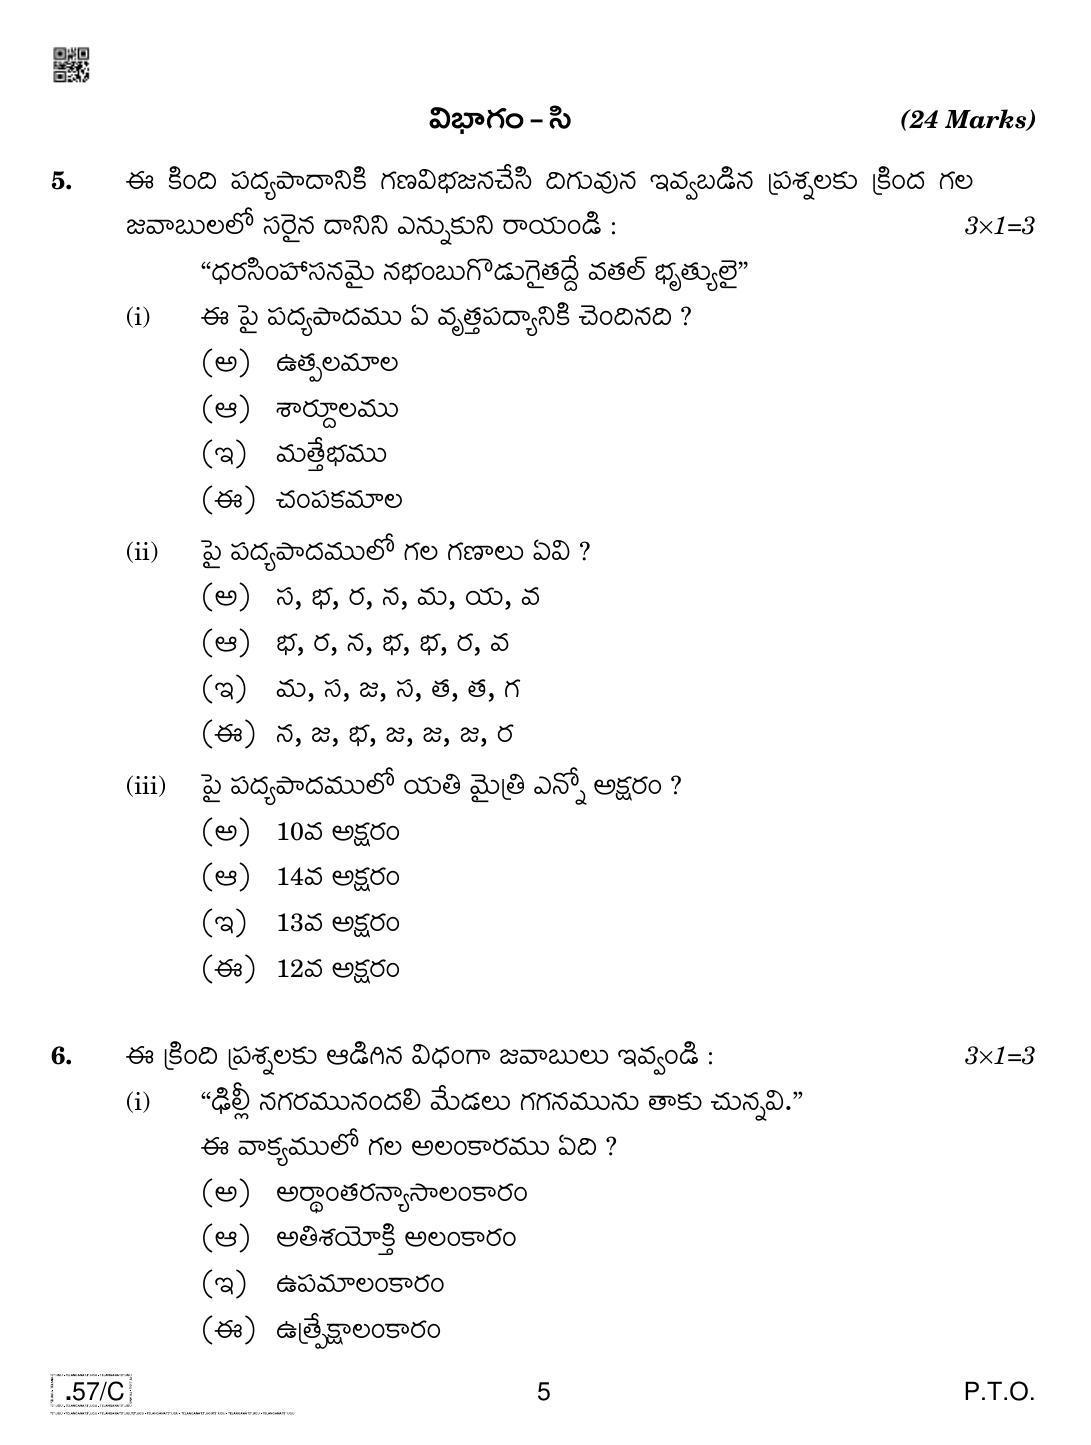 CBSE Class 10 Telug Telangana 2020 Compartment Question Paper - Page 5